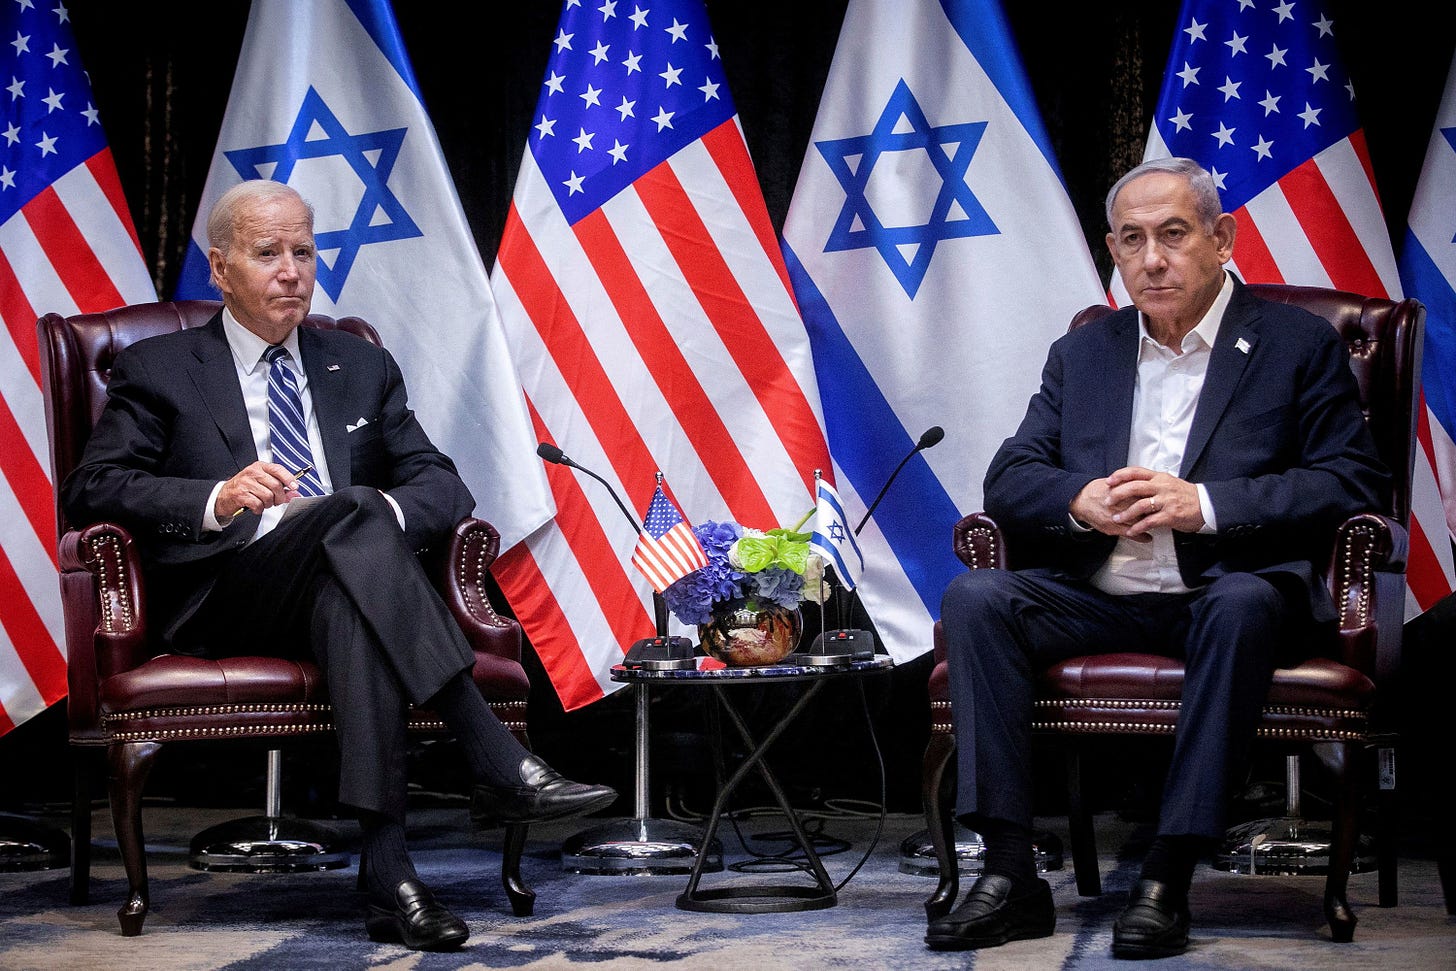 Biden tells donors Israel is losing support, Netanyahu must change his  government | CNN Politics